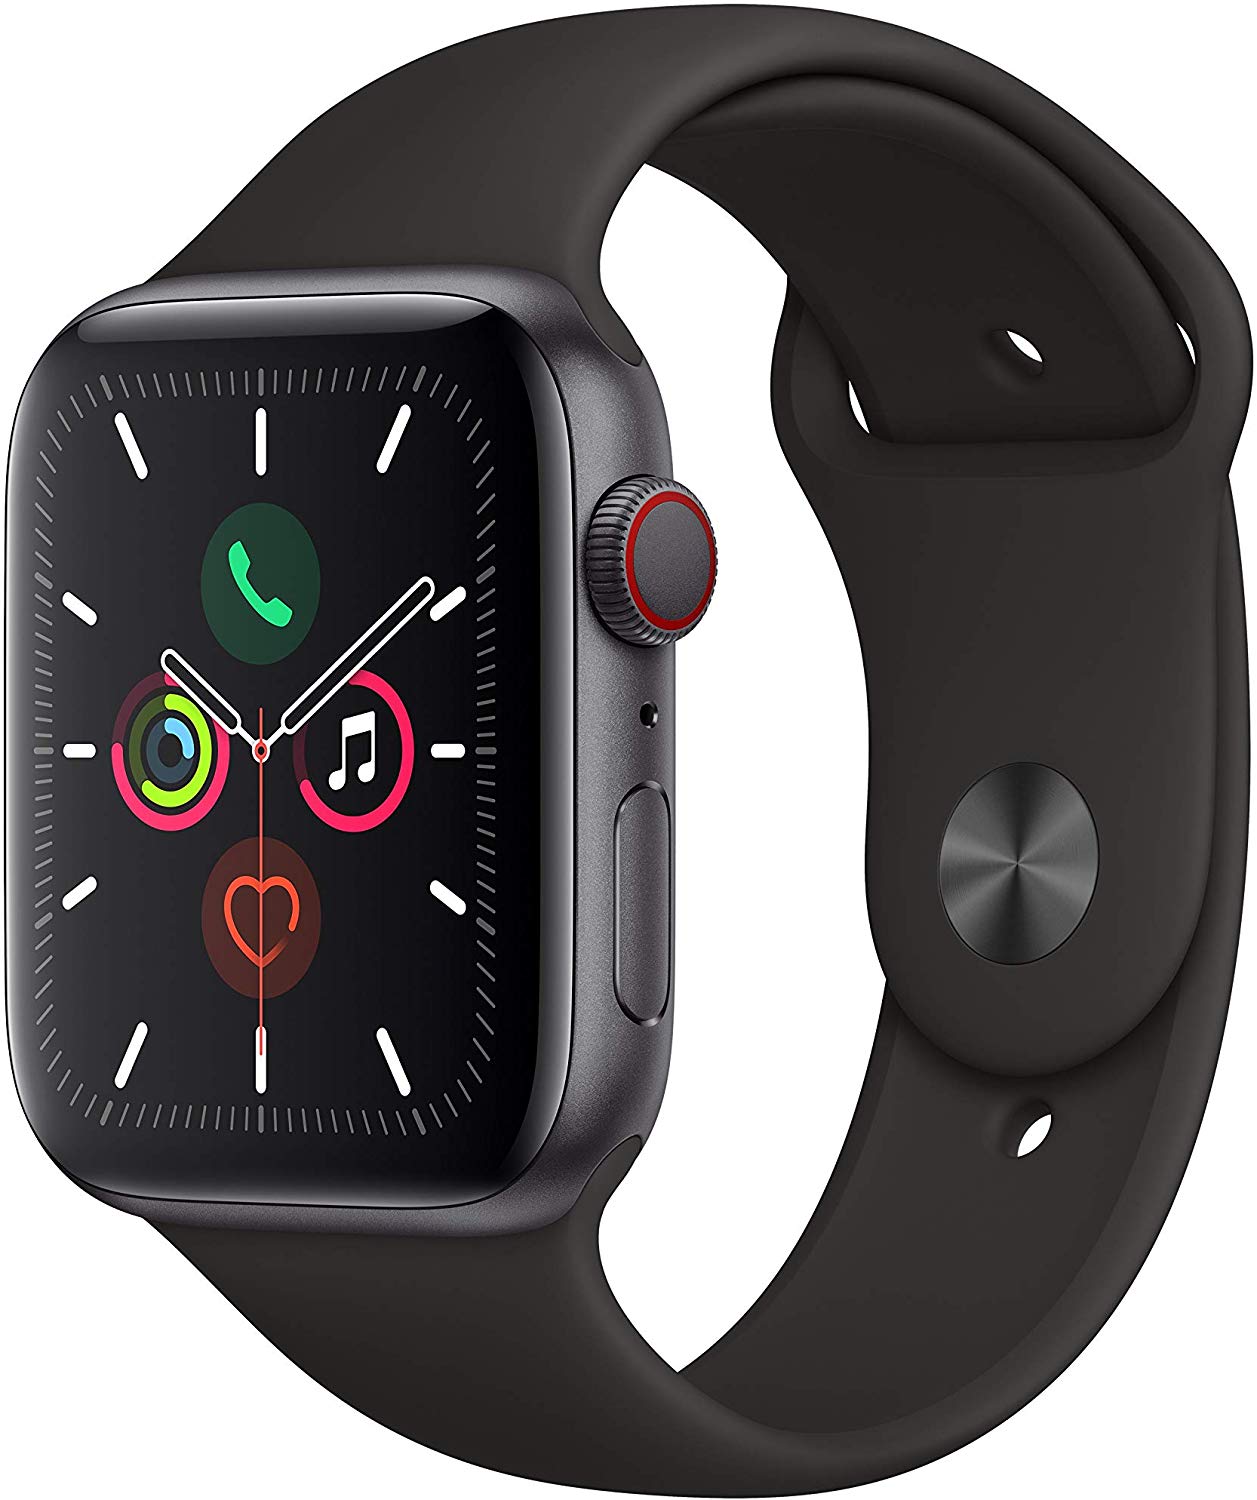 Apple Watch Series 5 (GPS + Cellular, 44 mm) black review